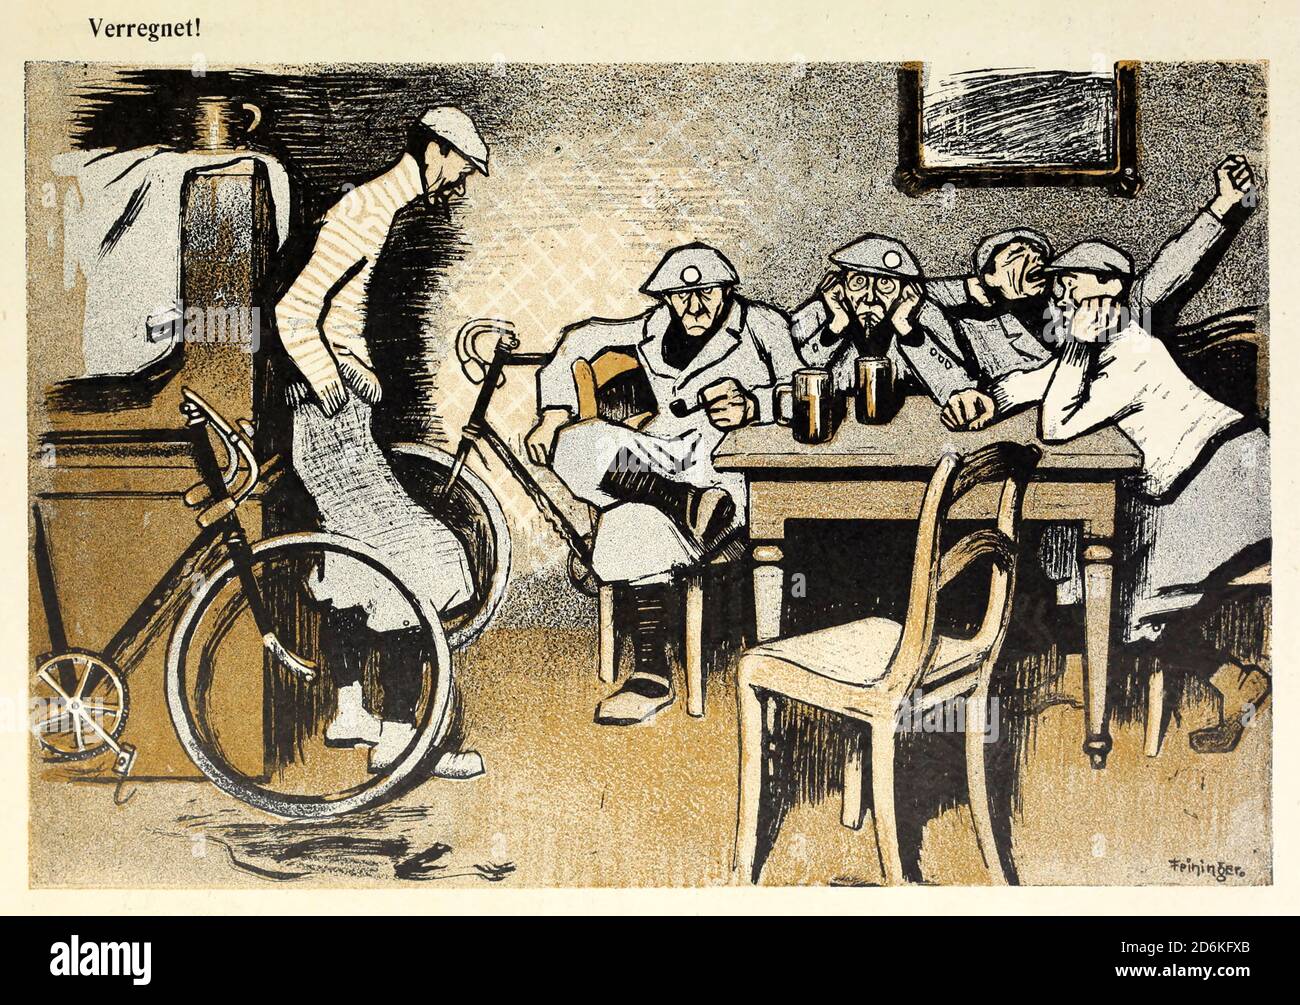 From the Book Das Narrenrad : Album fröhlicher Radfahrbilder [The fool's wheel: album of happy cycling pictures] by Feininger, Lyonel, 1871-1956, illustrator; Heilemann, Ernst, 1870- illustrator; Hansen, Knut, illustrator; Fürst, Edmund, 1874-1955, illustrator; Edel, Edmund, illustrator; Schnebel, Carl, illustrator; Verlag Otto Elsner, printer. Published in Germany in 1898 Stock Photo